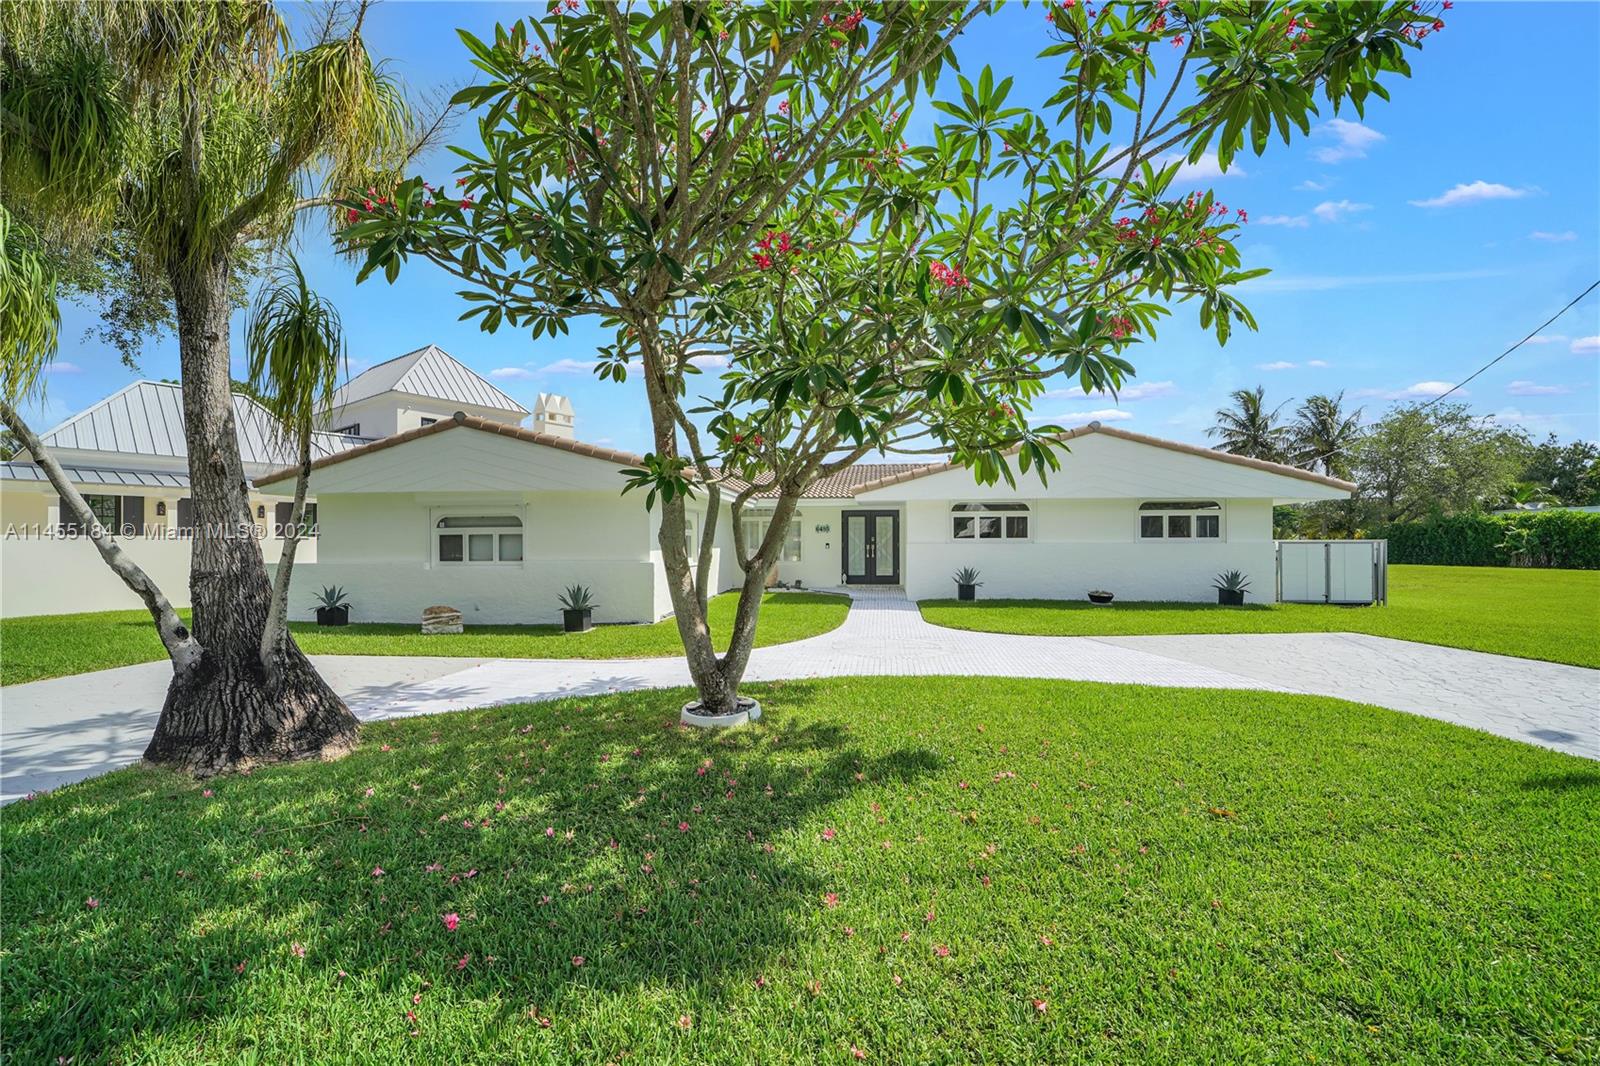 6485 Sw 52nd St St, Miami, Broward County, Florida - 5 Bedrooms  
4 Bathrooms - 